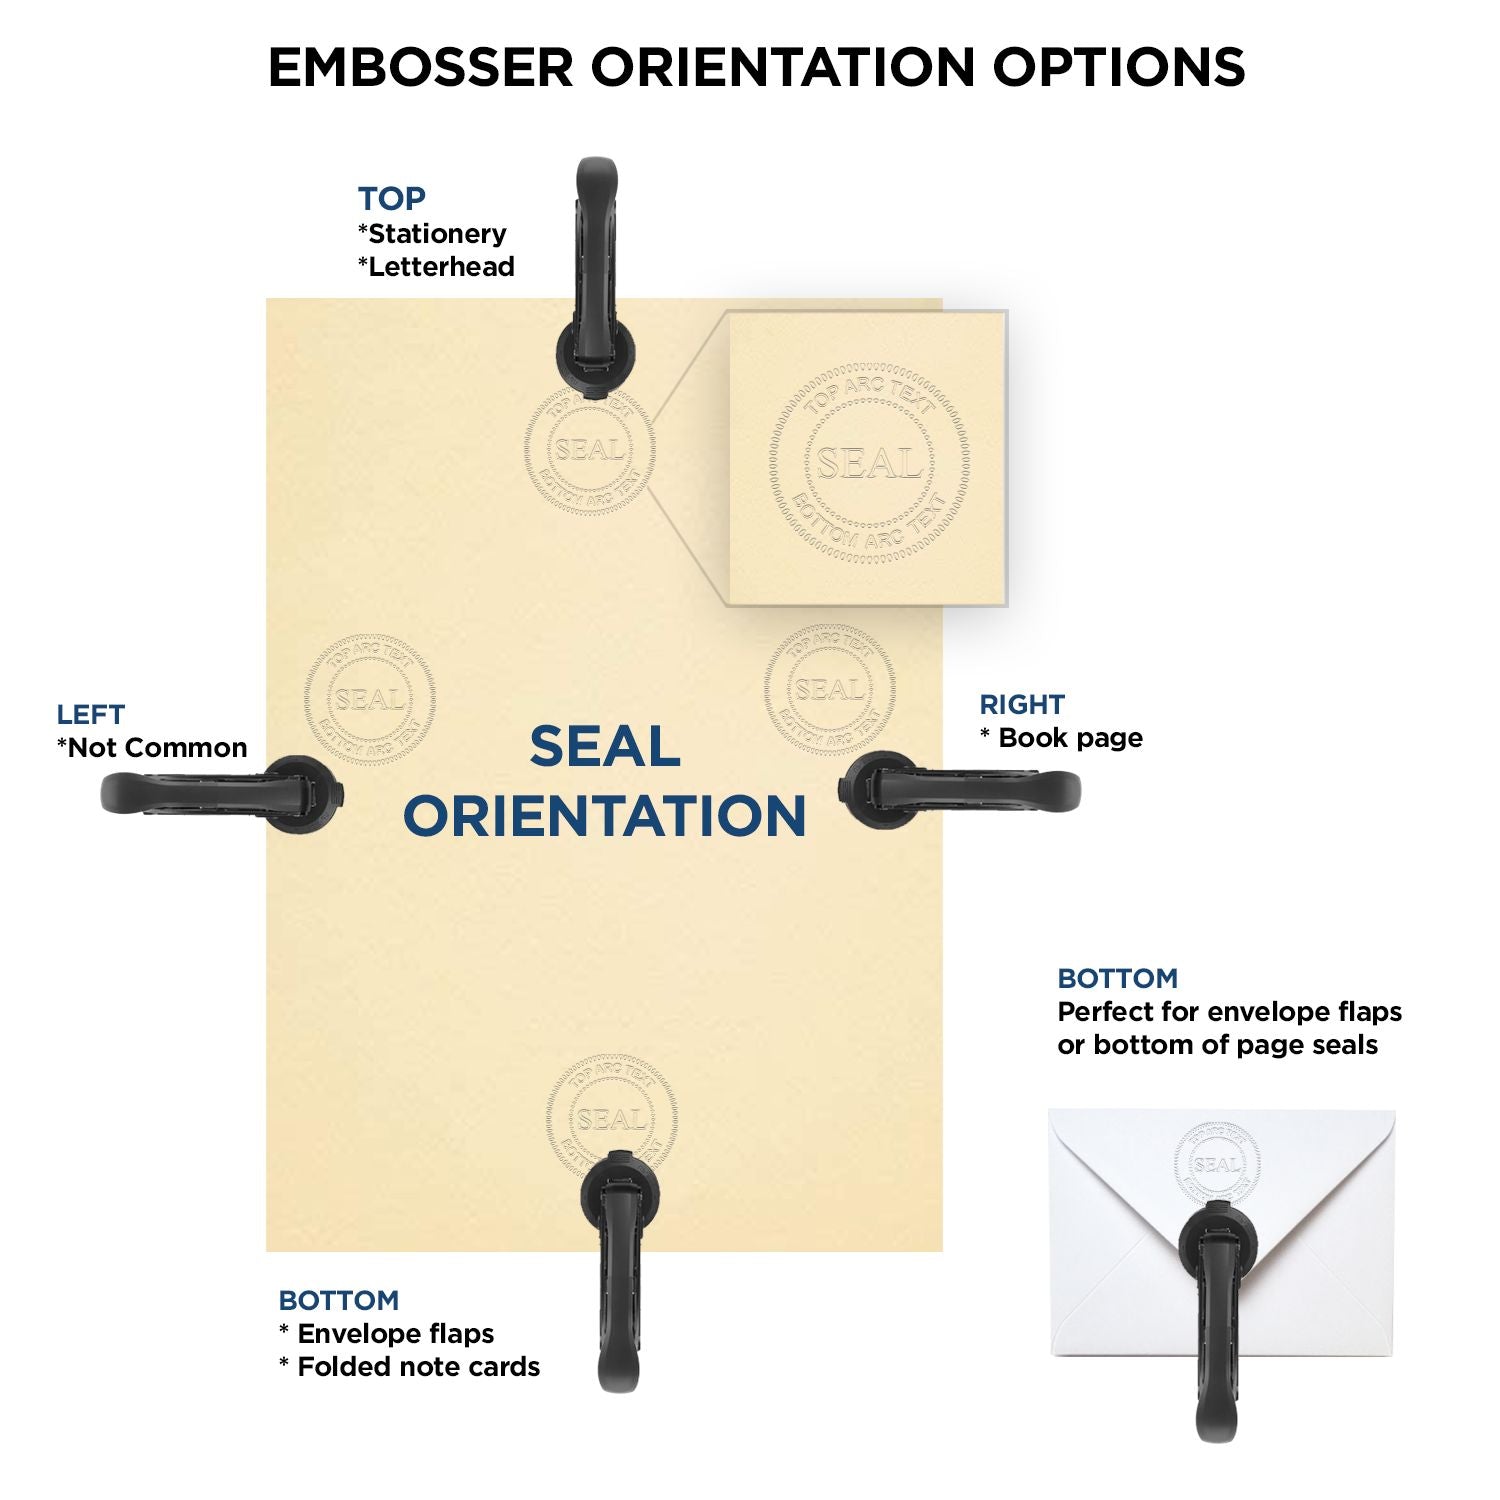 An infographic for the New York Desk Surveyor Seal Embosser showing embosser orientation, this is showing examples of a top, bottom, right and left insert.